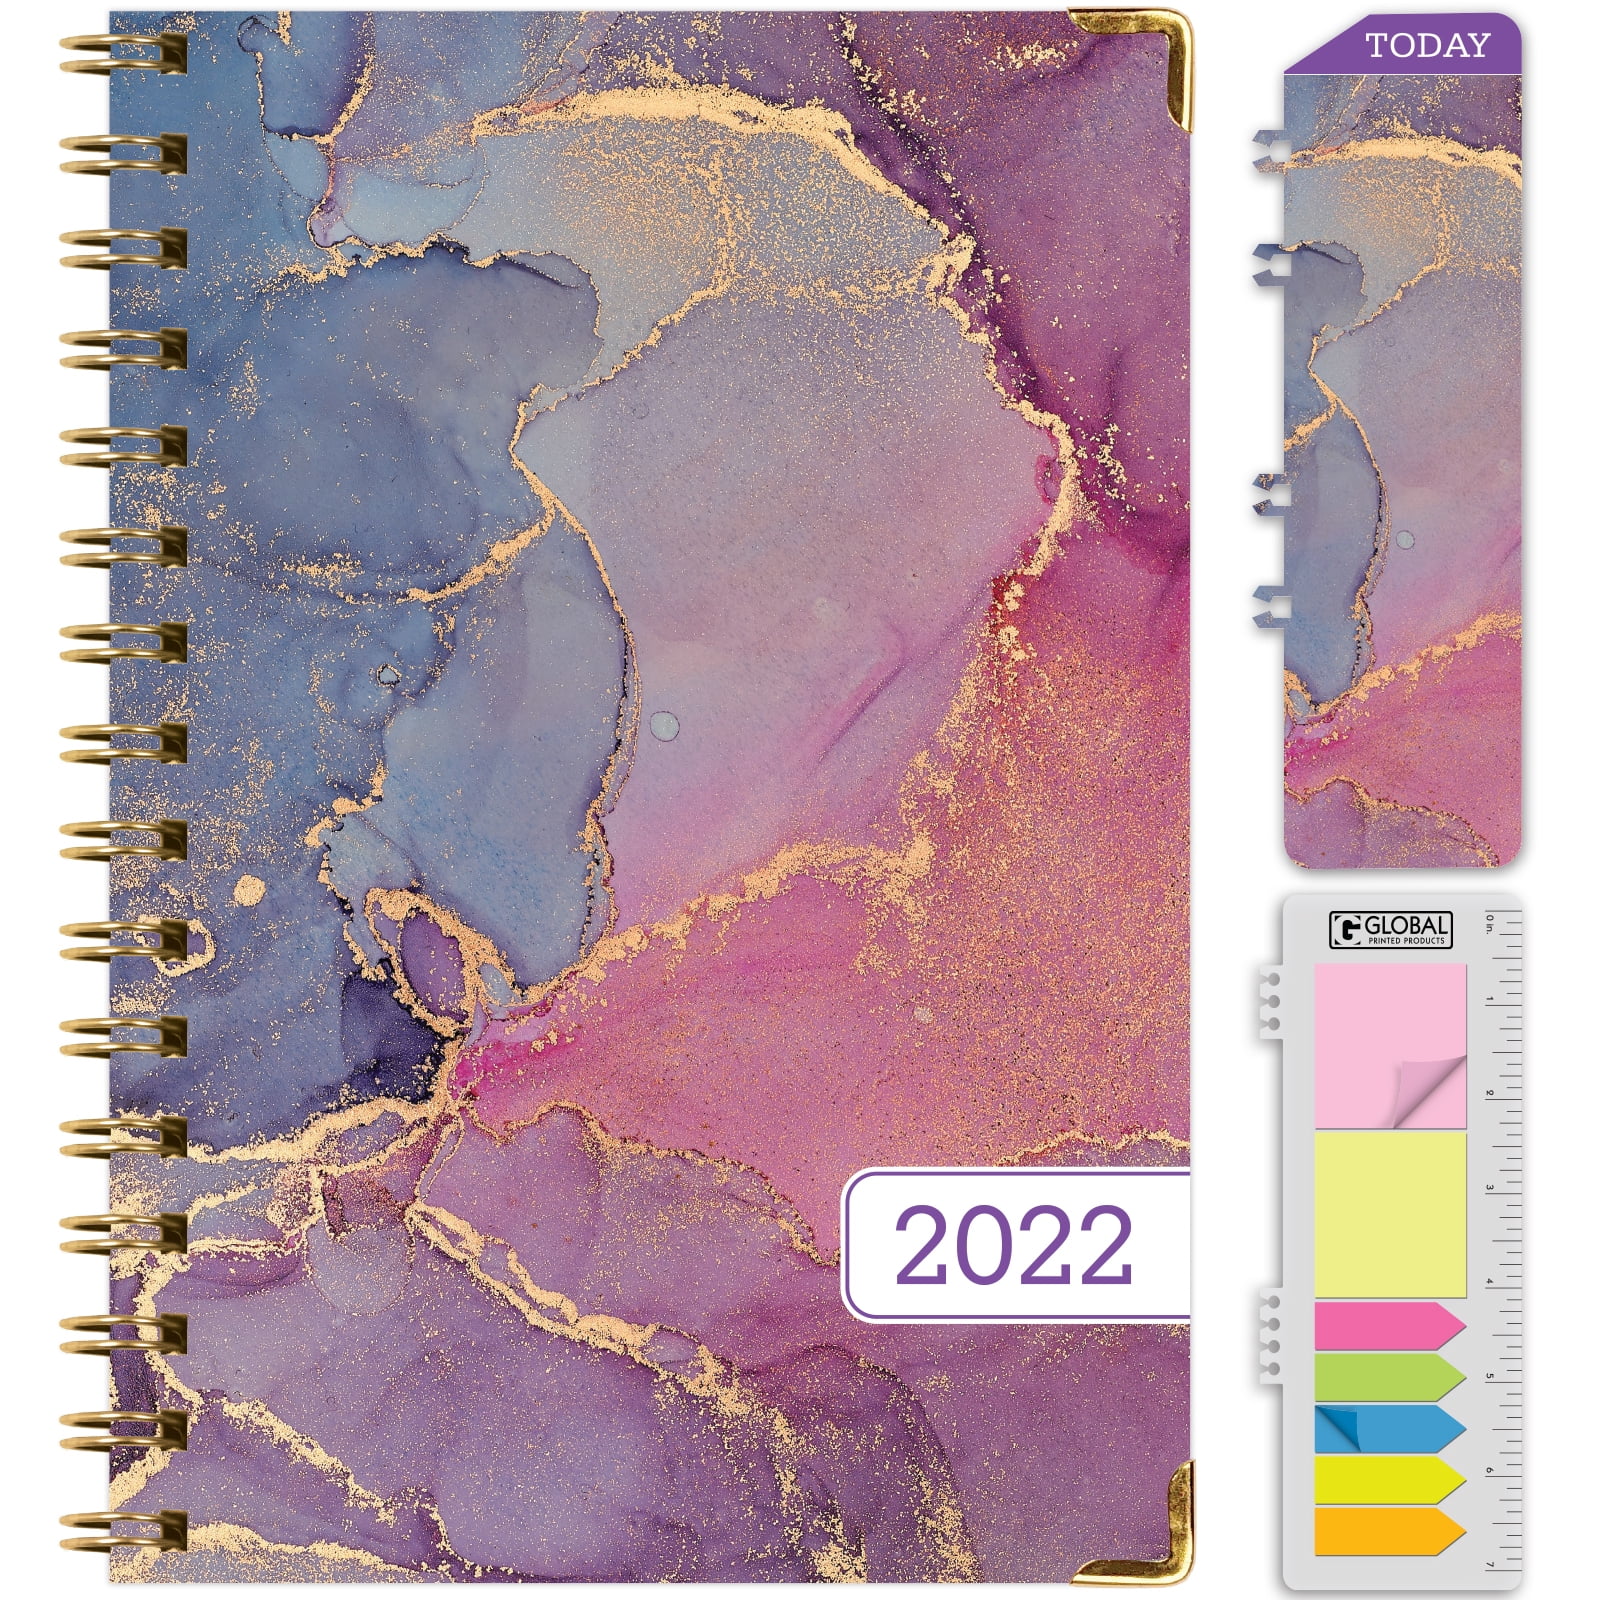 Teal Floral Pocket Folder and Sticky Note Set Global Printed Products HARDCOVER 2022 Planner: November 2021 Through December 2022 Bookmark 8.5x11 Daily Weekly Monthly Planner Yearly Agenda 